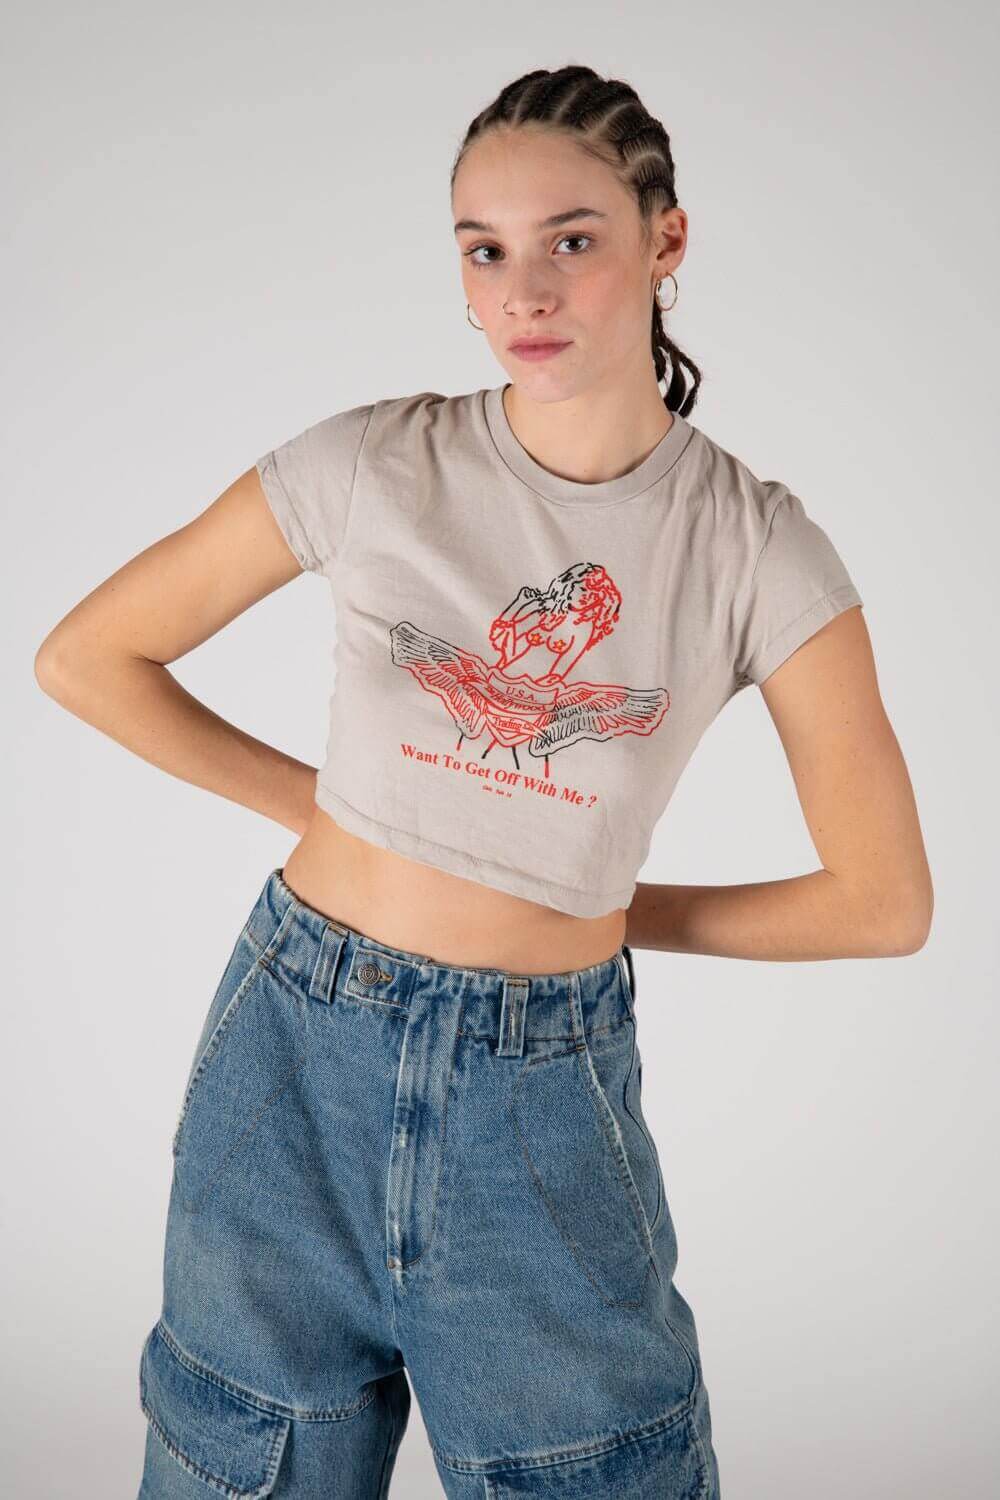 BELLY BUTTON - ANGEL Crop t-shirt printed on the front. Composition: 100% Cotton HTC LOS ANGELES